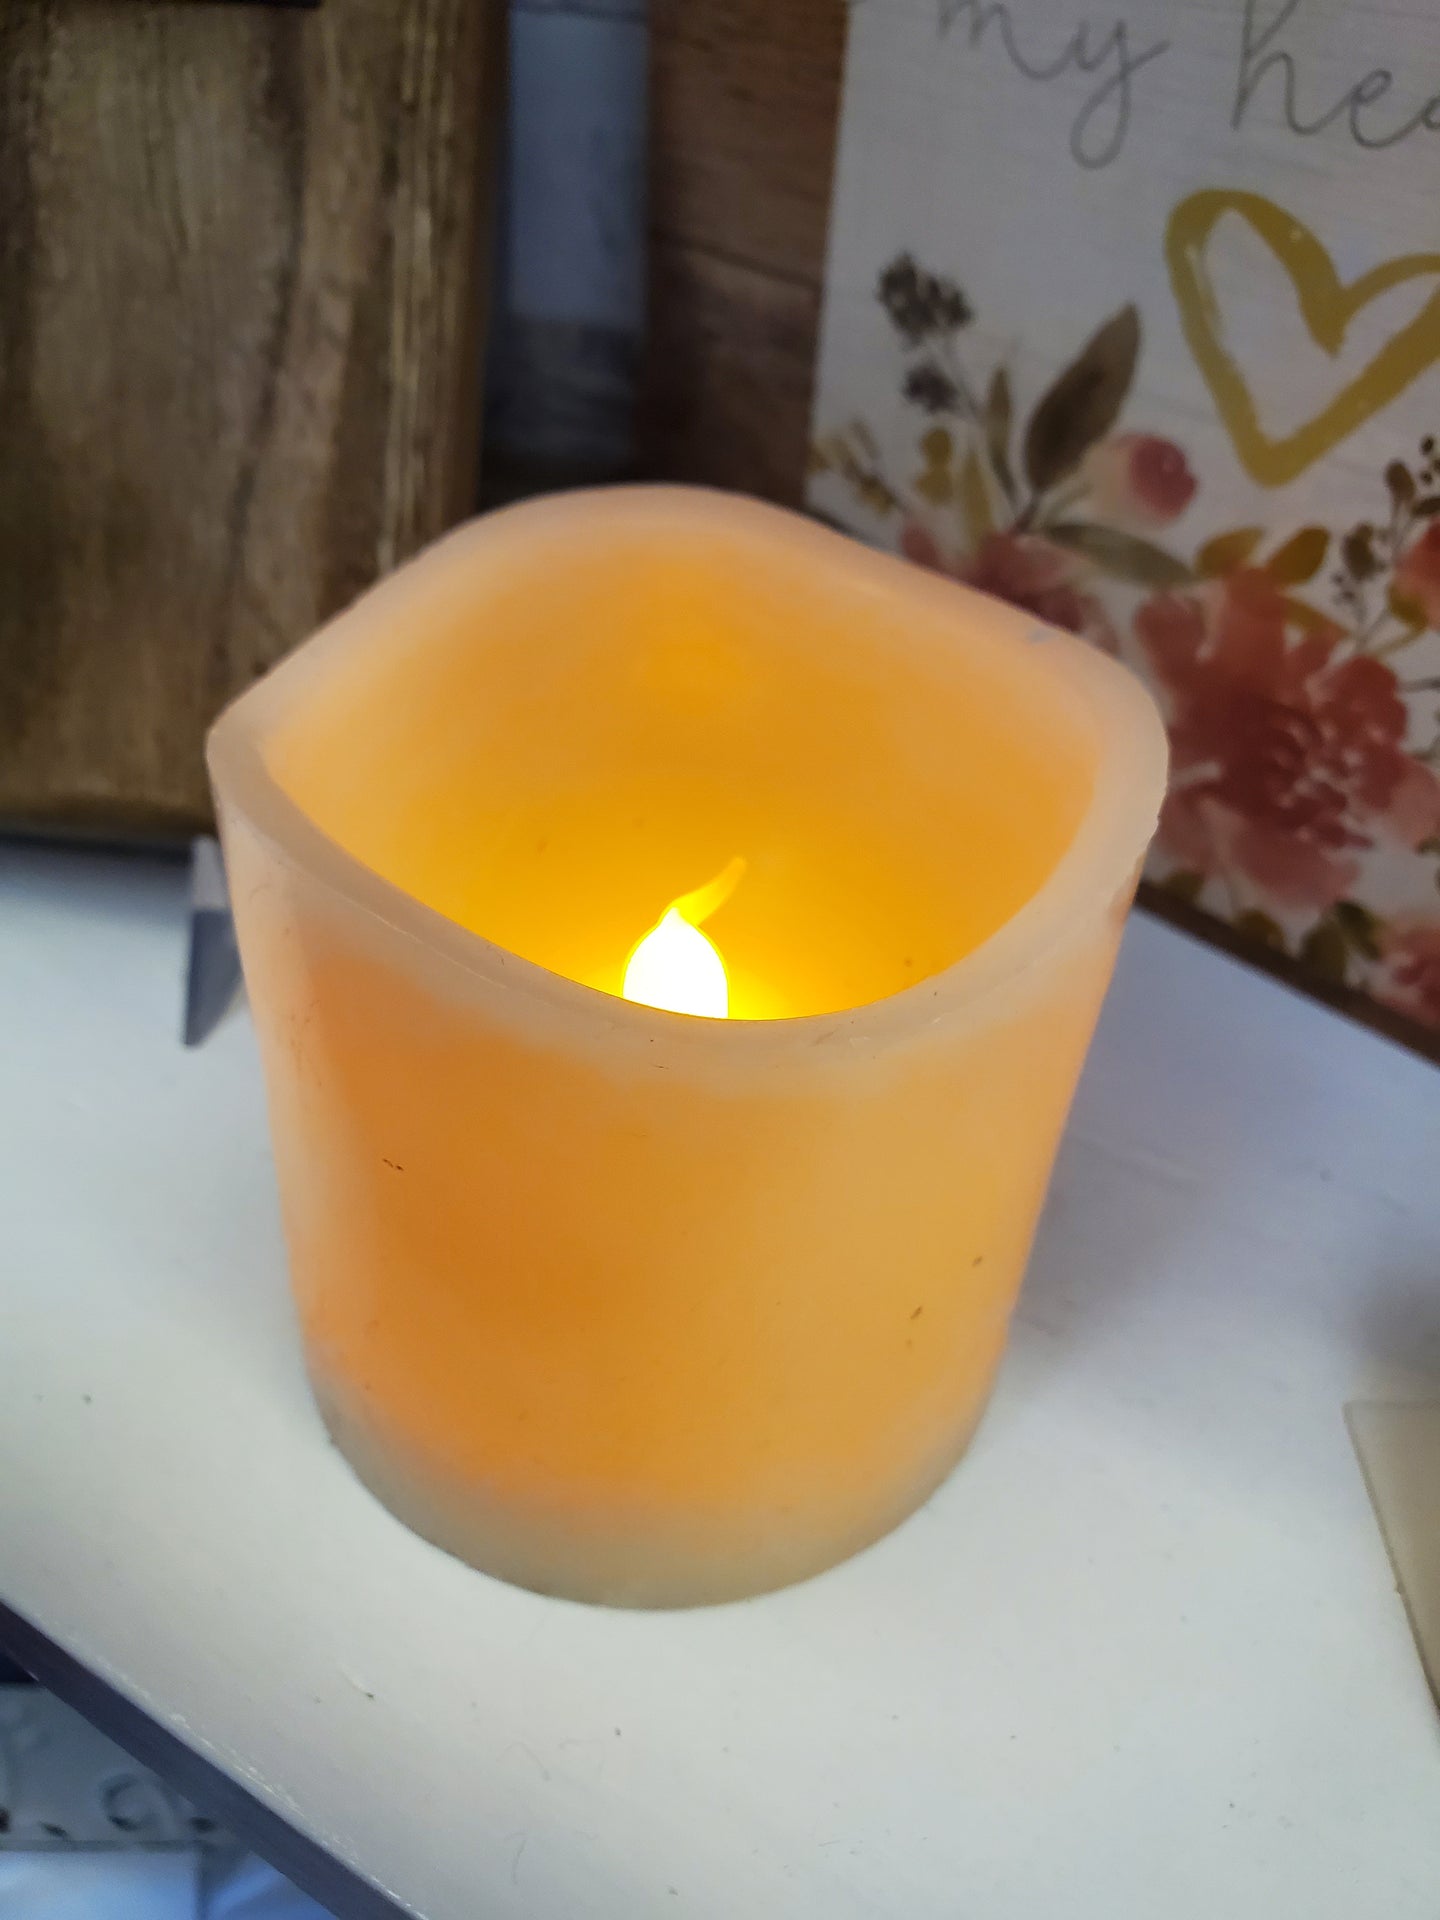 Flameless LED Real Wax Candle